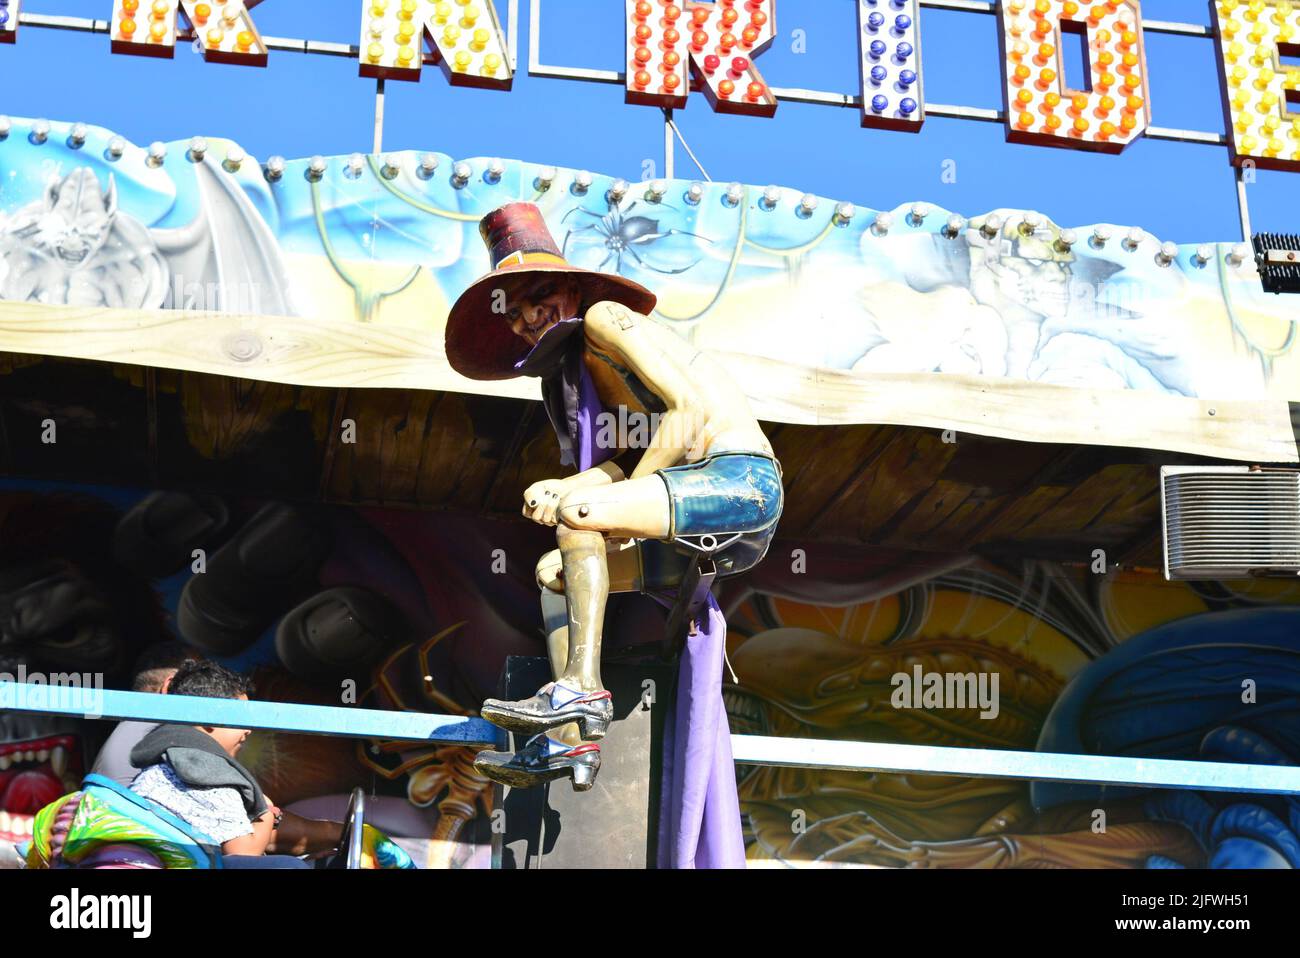 Terrifying figure hanging in front of a toy with the name ghost train or dark ride, train style toy to scare, Brazil , bottom-up view Stock Photo